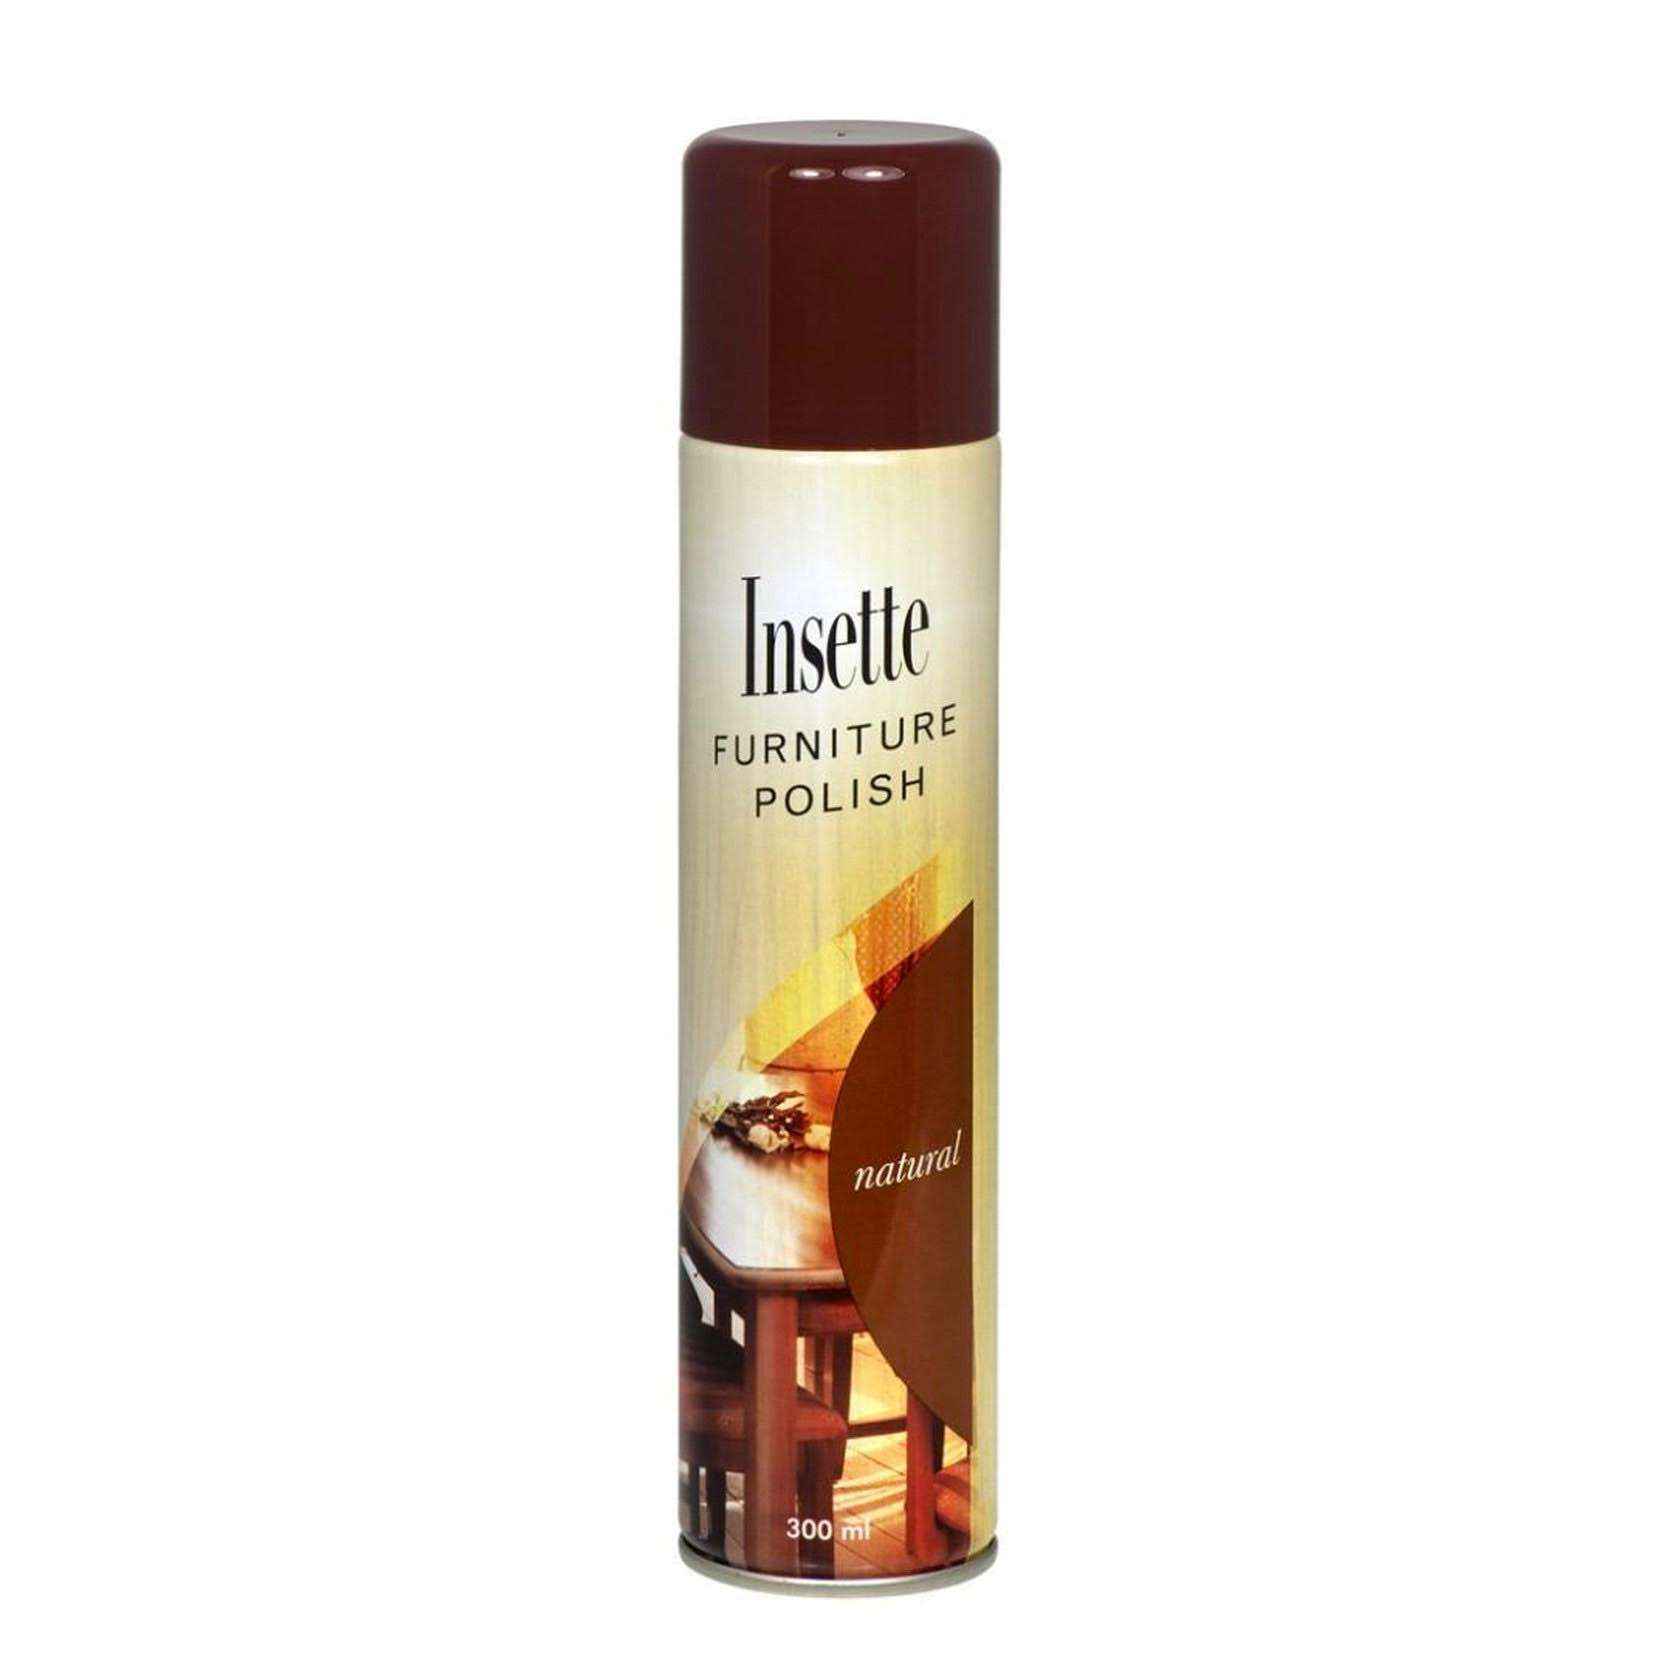 Insette Furniture Polish 300ml Natural x12 (Pack of 12)